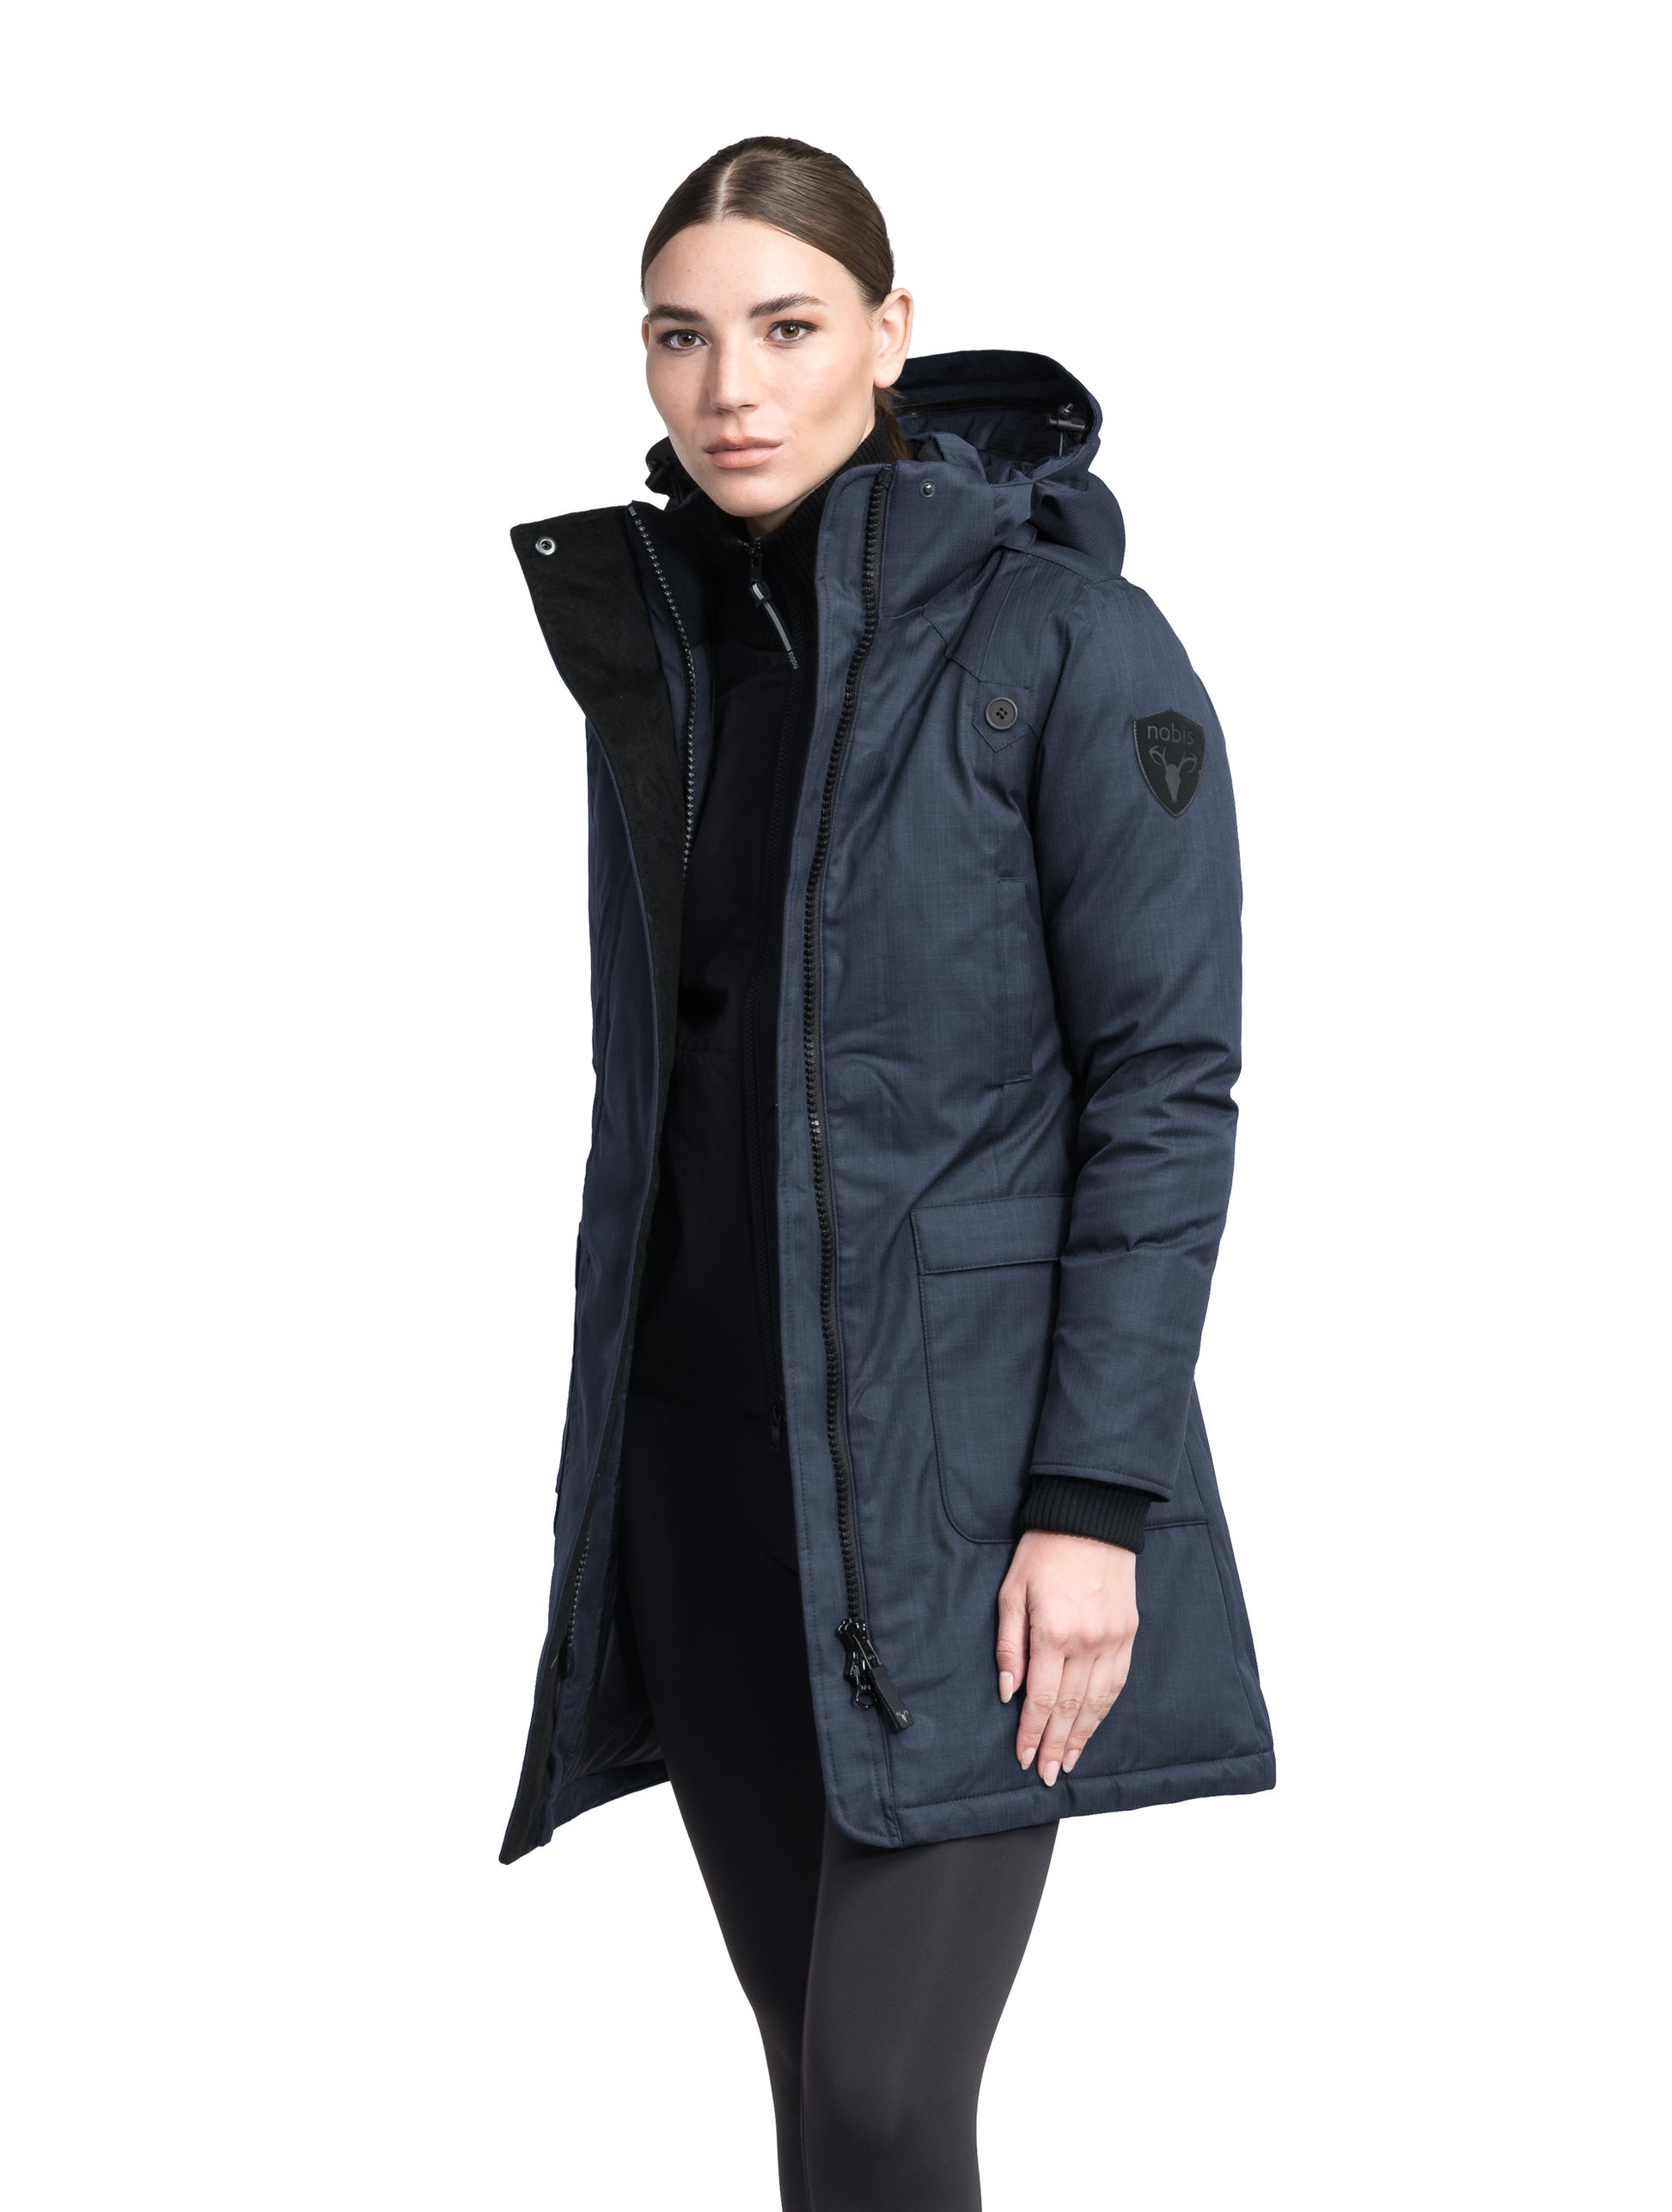 Merideth Furless Ladies Parka in thigh length, Canadian white duck down insulation, removable down-filled hood, centre-front two-way zipper with magnetic wind flap closure, four exterior pockets, and elastic ribbed cuffs, in Navy